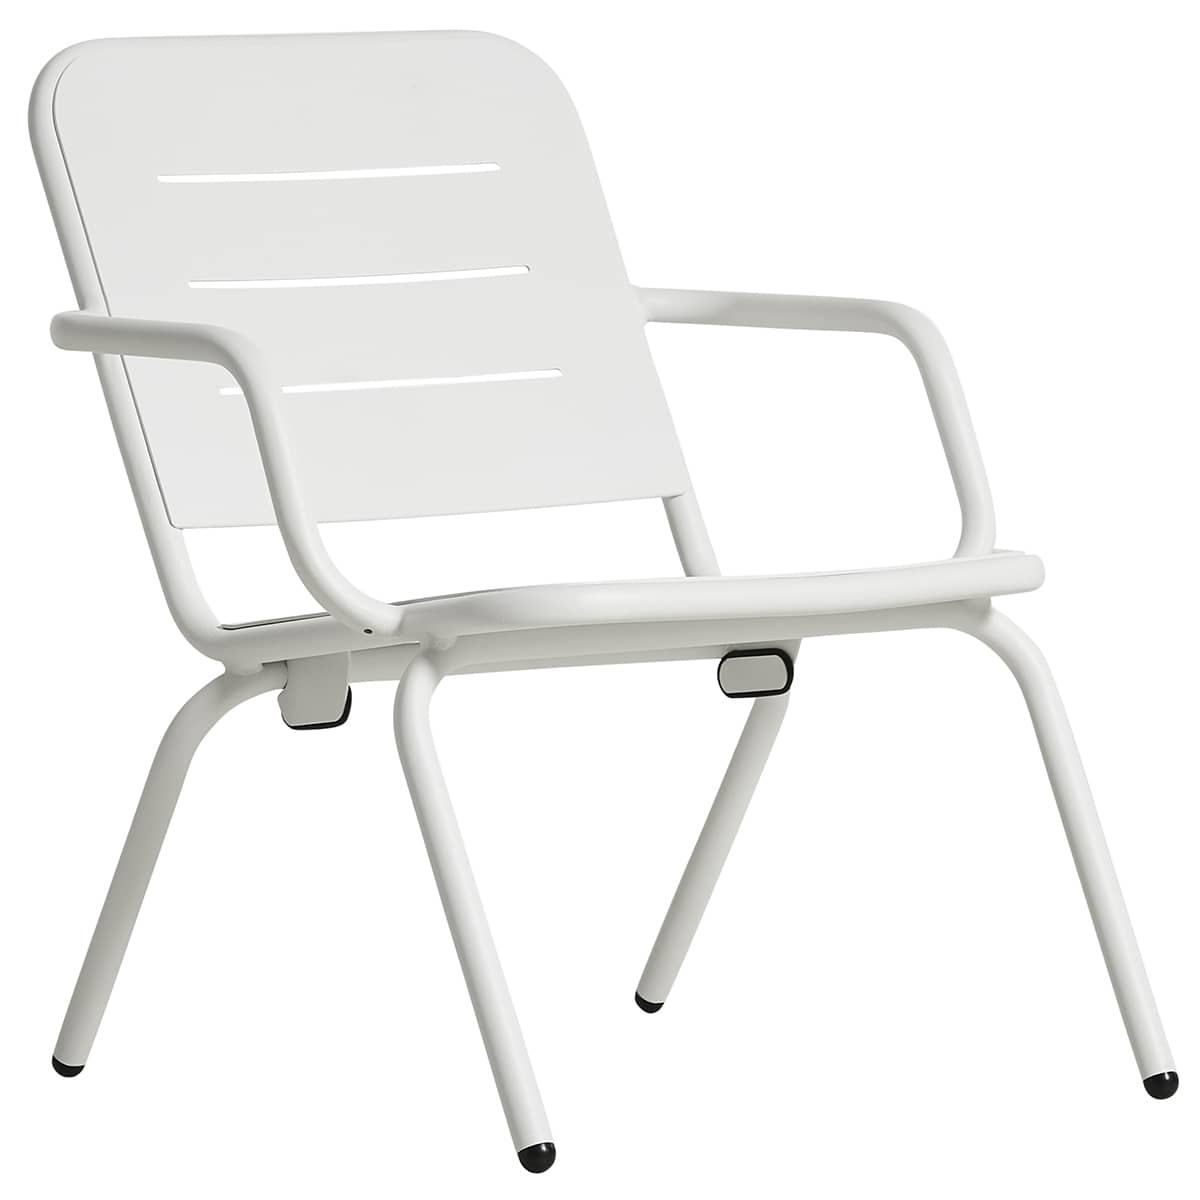 Chaise longue outdoor RAY, par FASTING & ROLFF pour WOUD